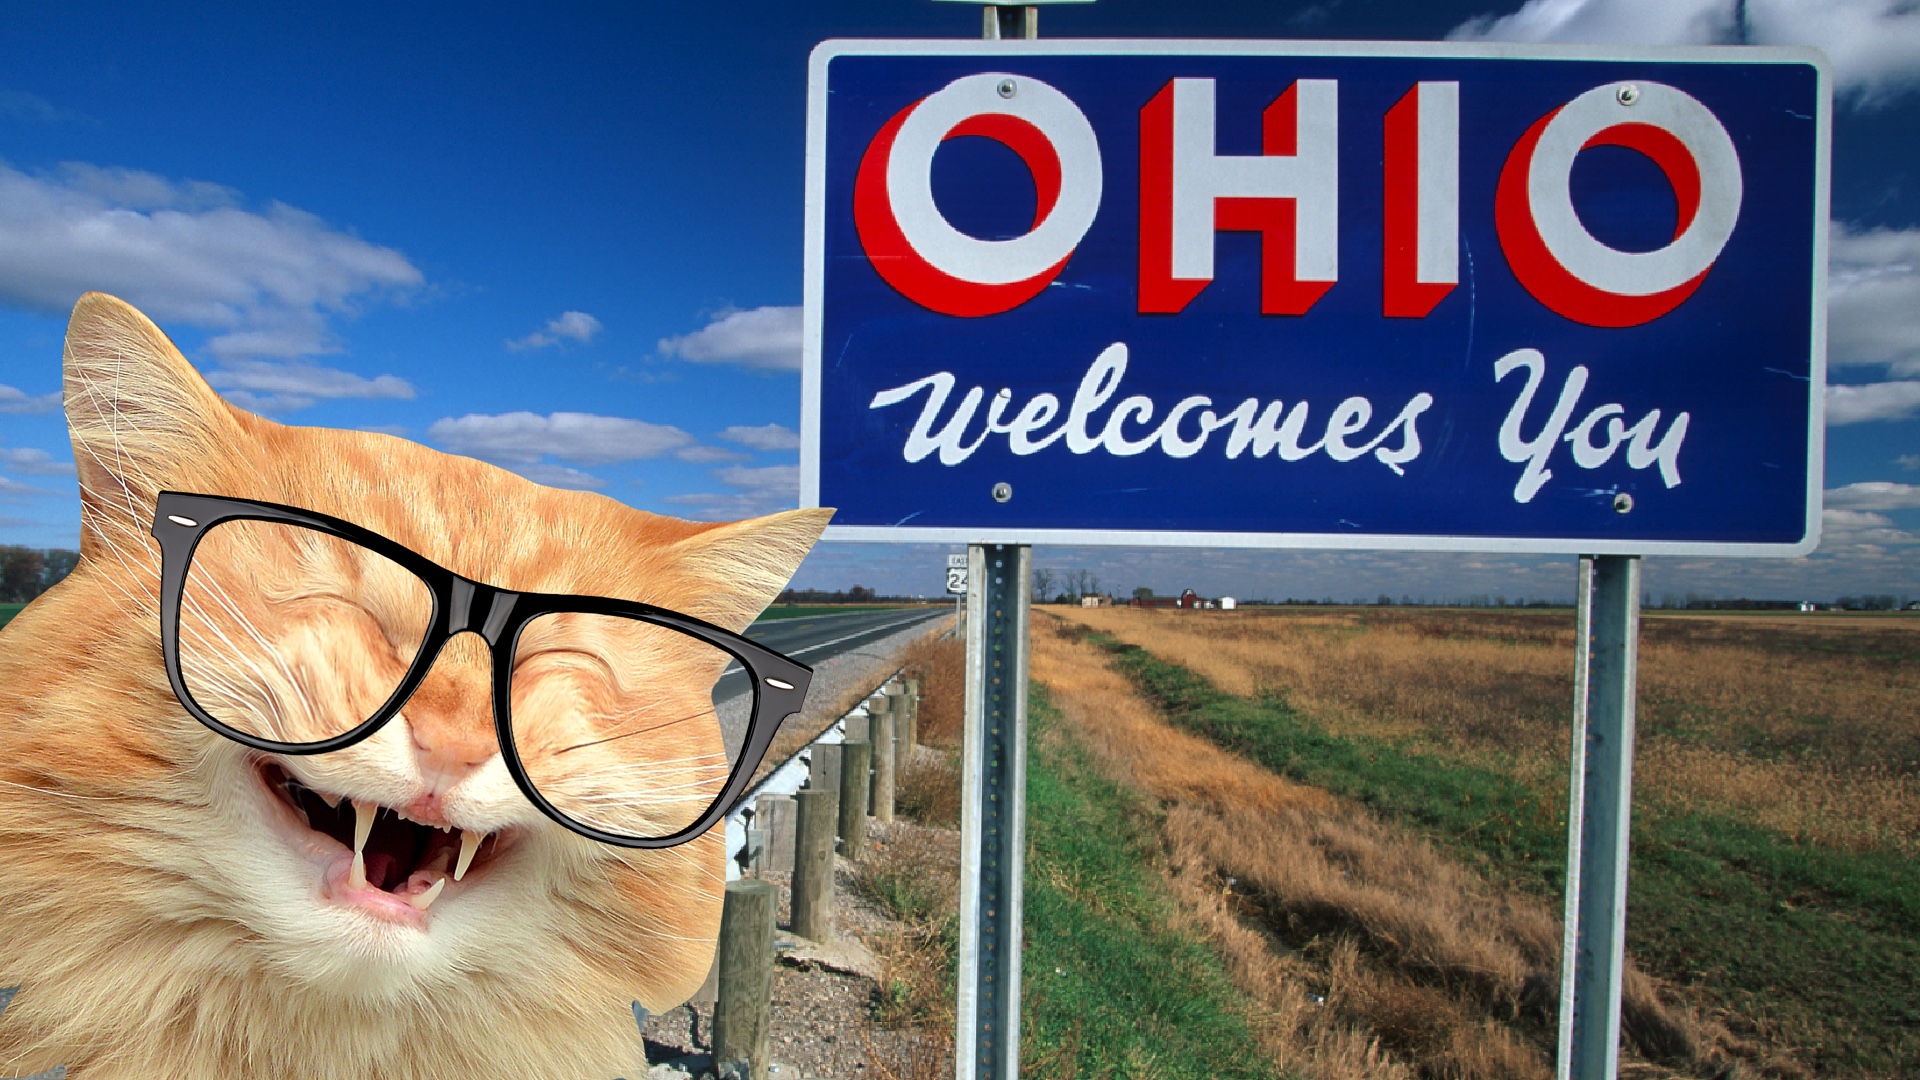 A cat goes to Ohio